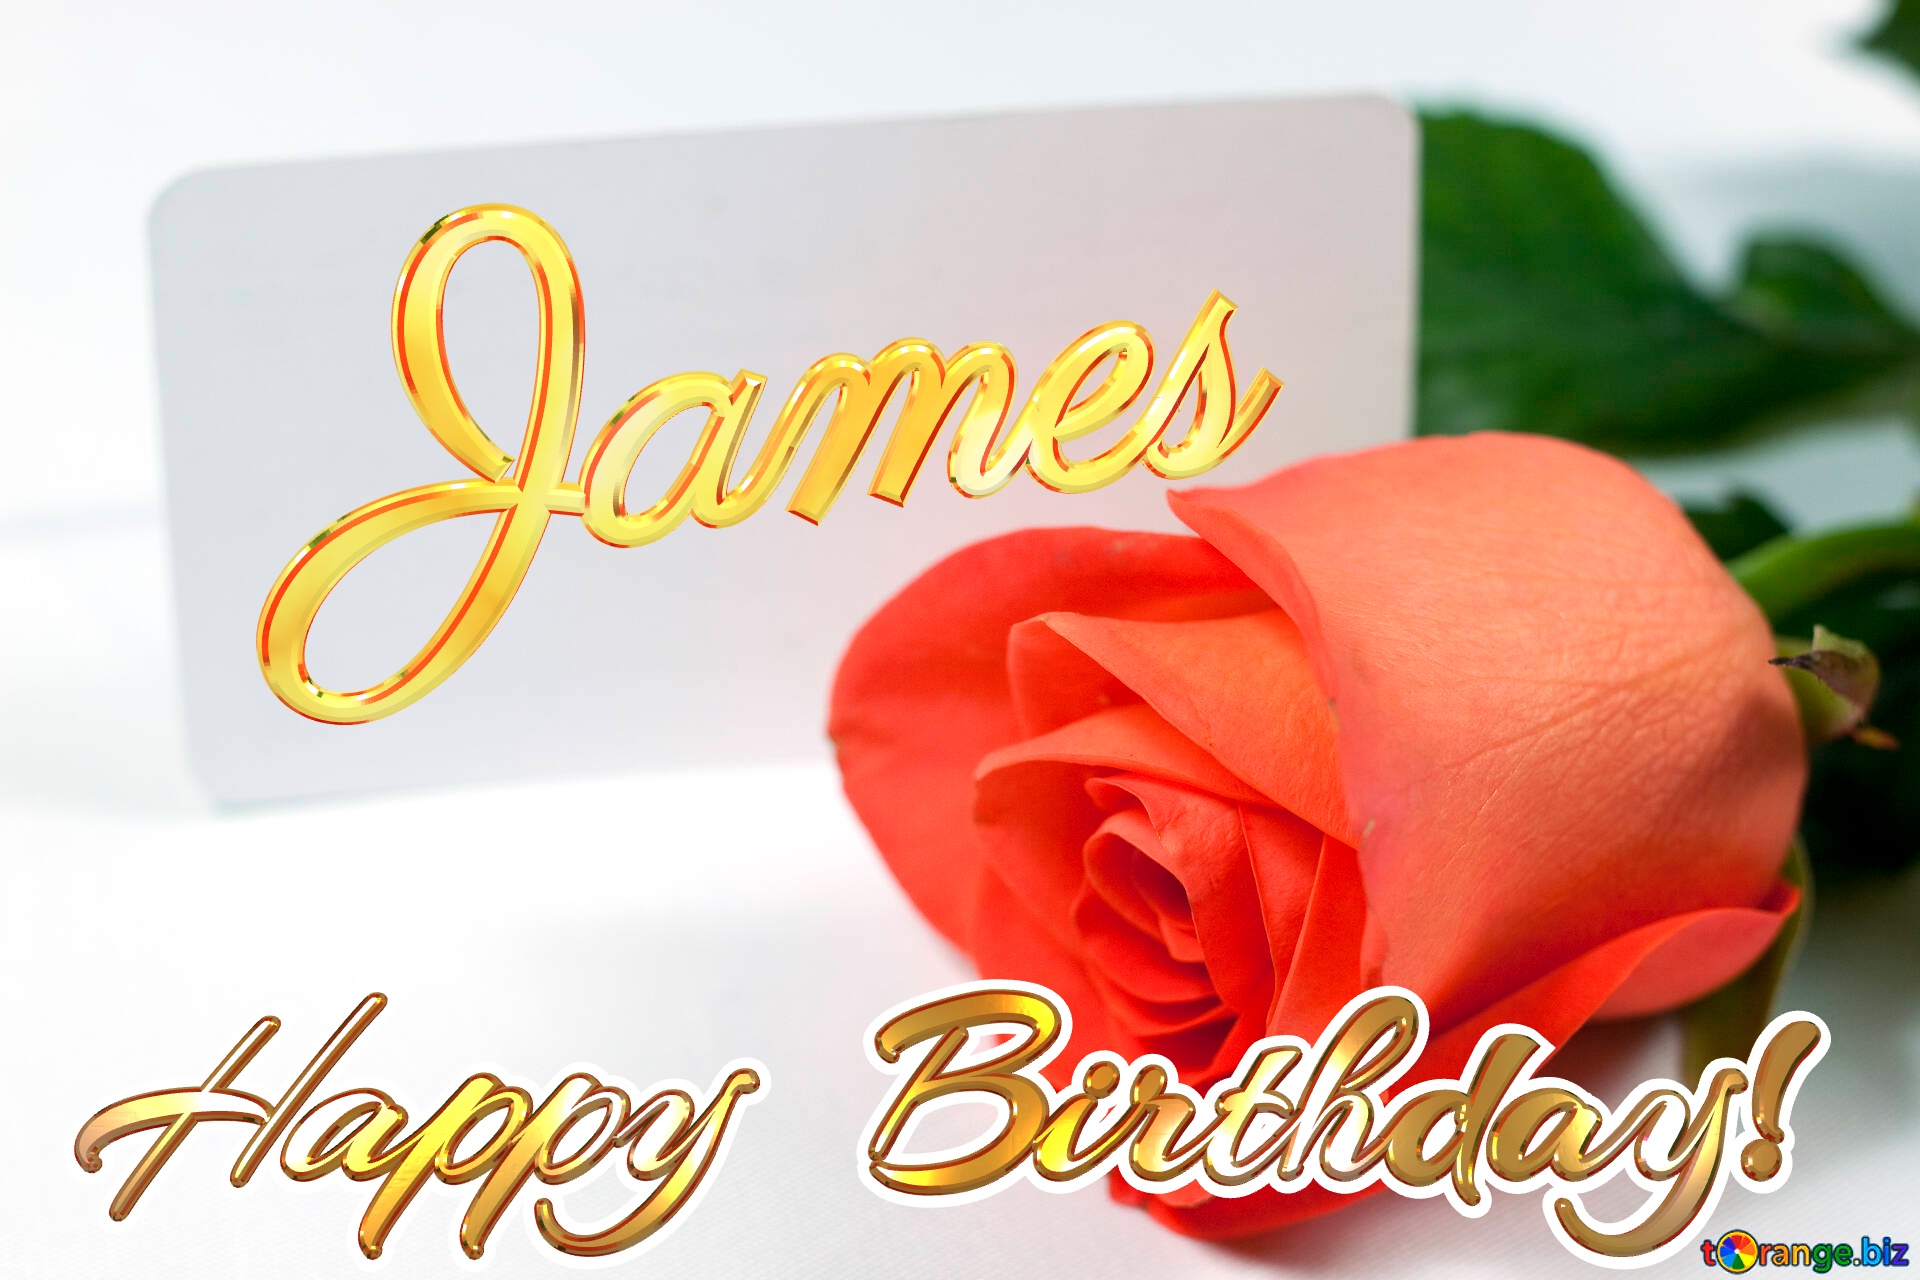 Happy  Birthday! James  Rosa   business card . On  White  background. №7233